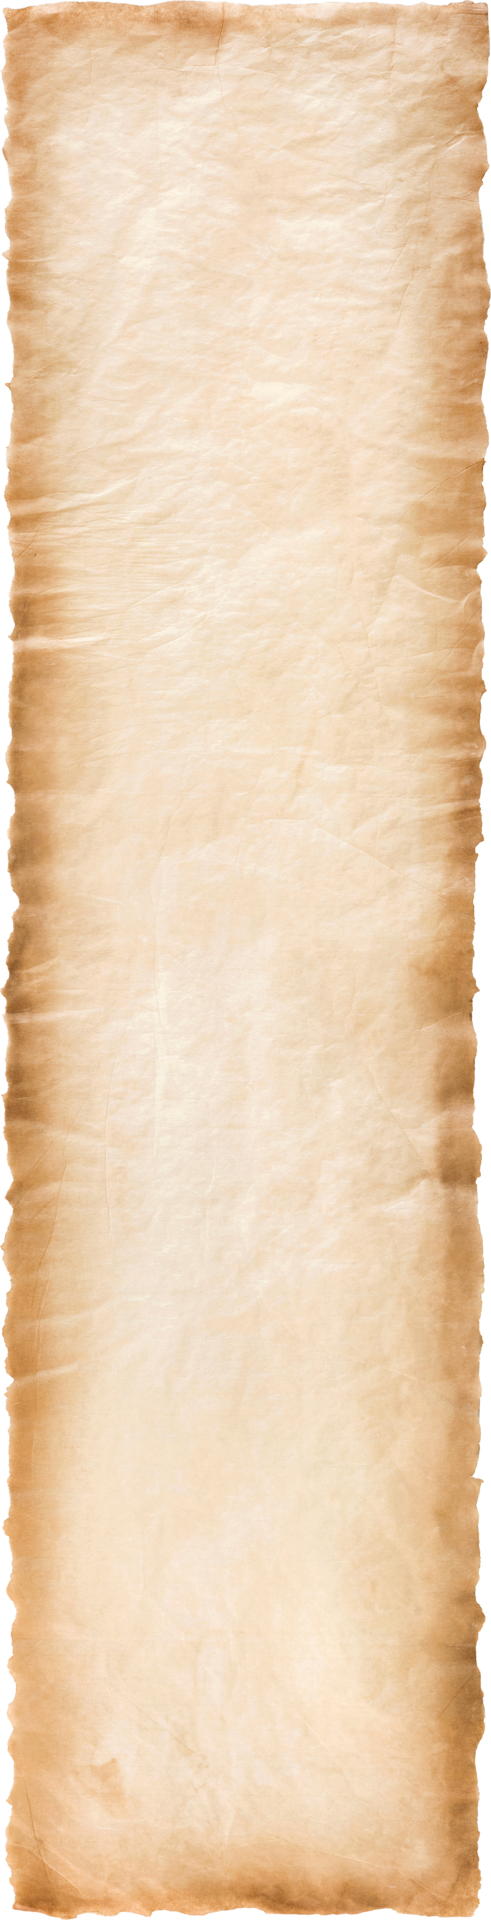 https://static.vecteezy.com/system/resources/previews/012/981/764/original/old-parchment-paper-sheet-vintage-aged-or-texture-background-png.png